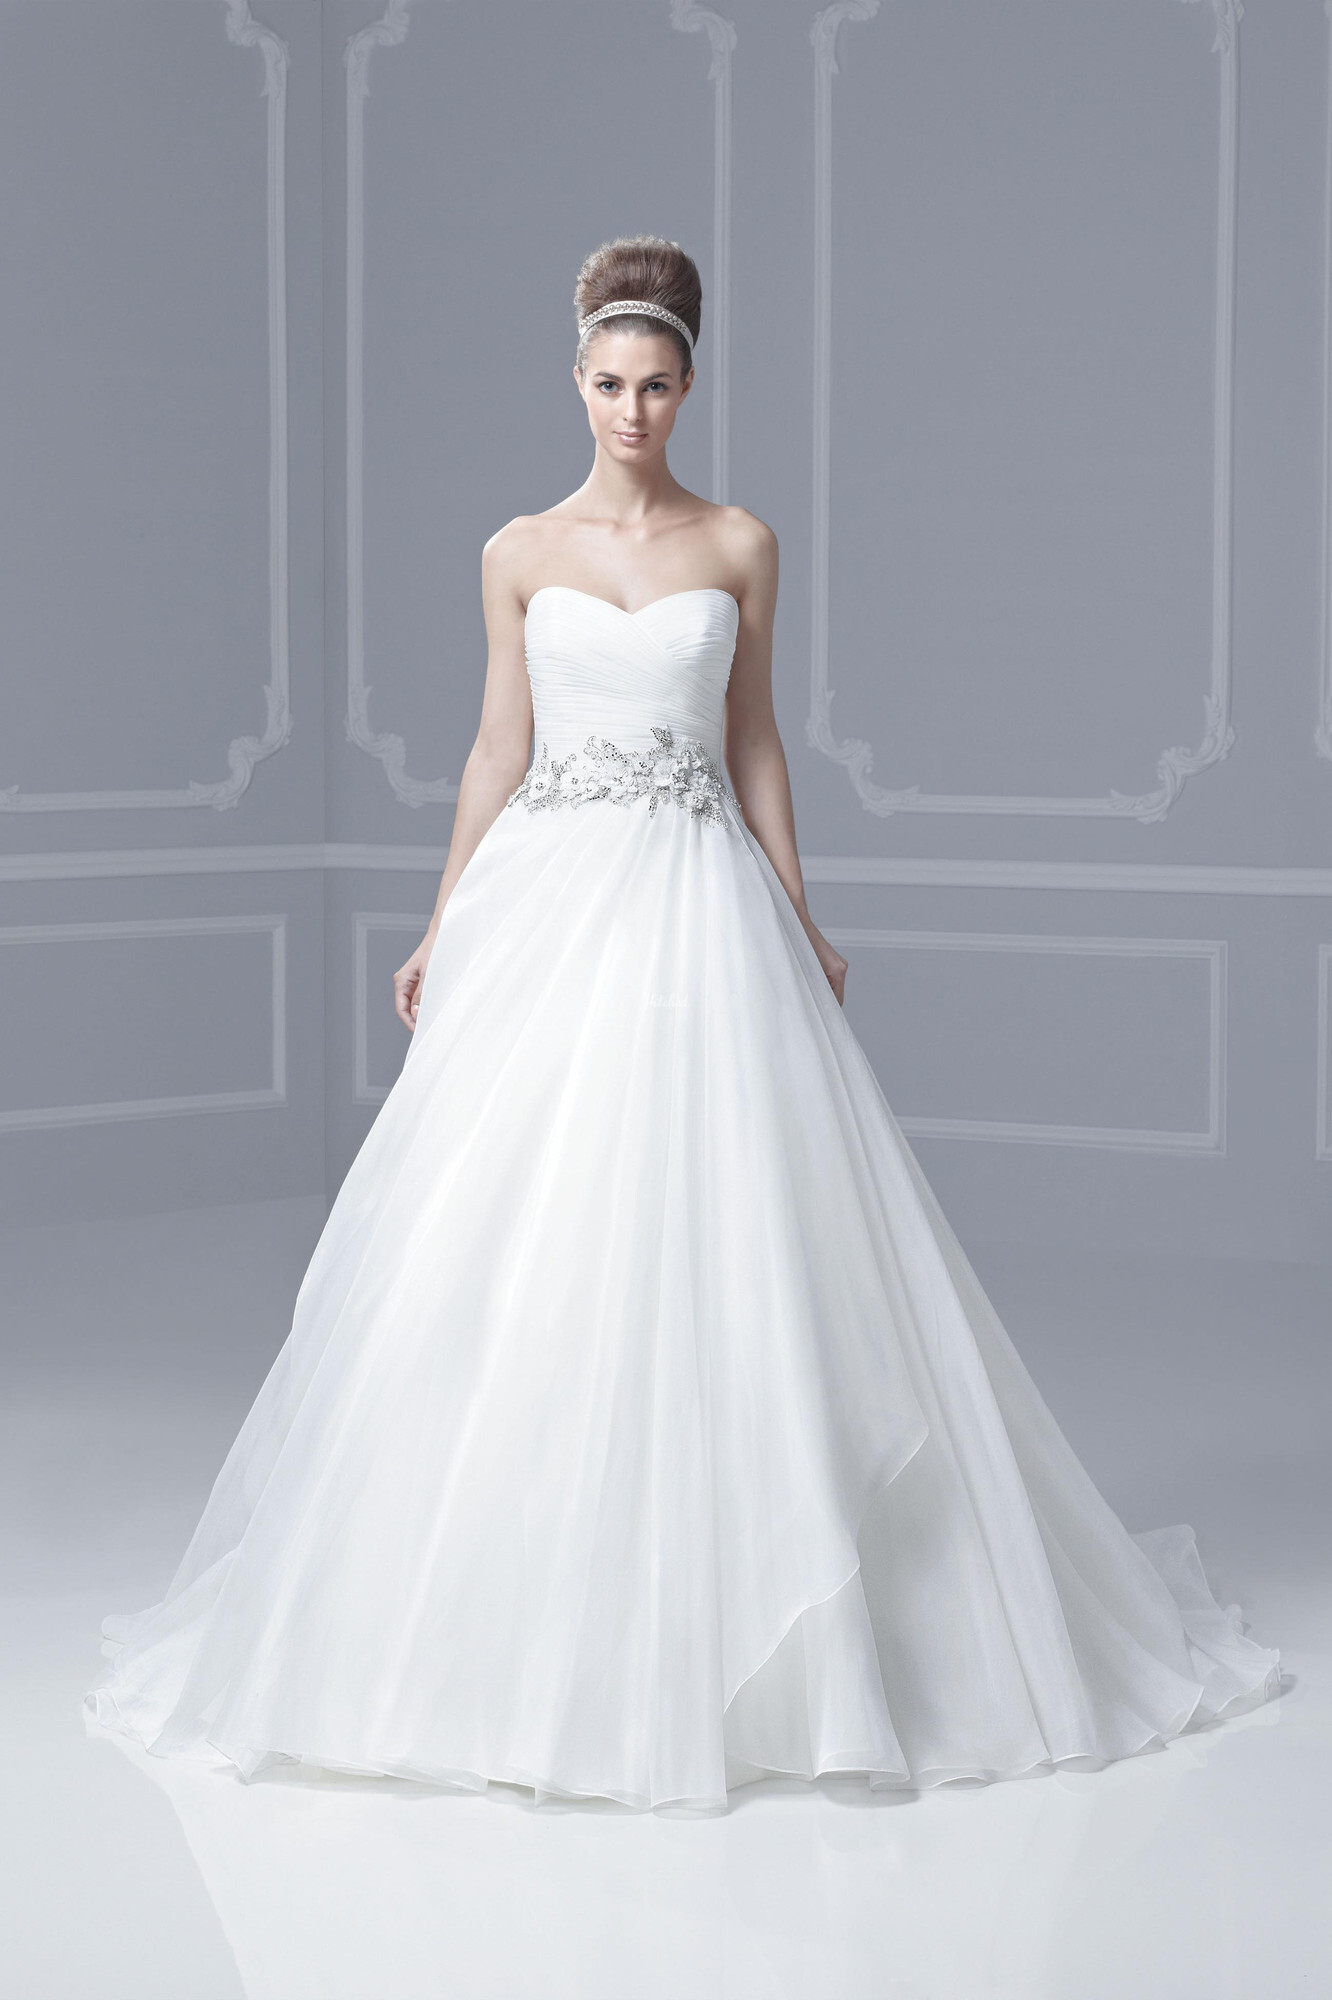 Florida Wedding Dress from Blue By Enzoani - hitched.co.uk